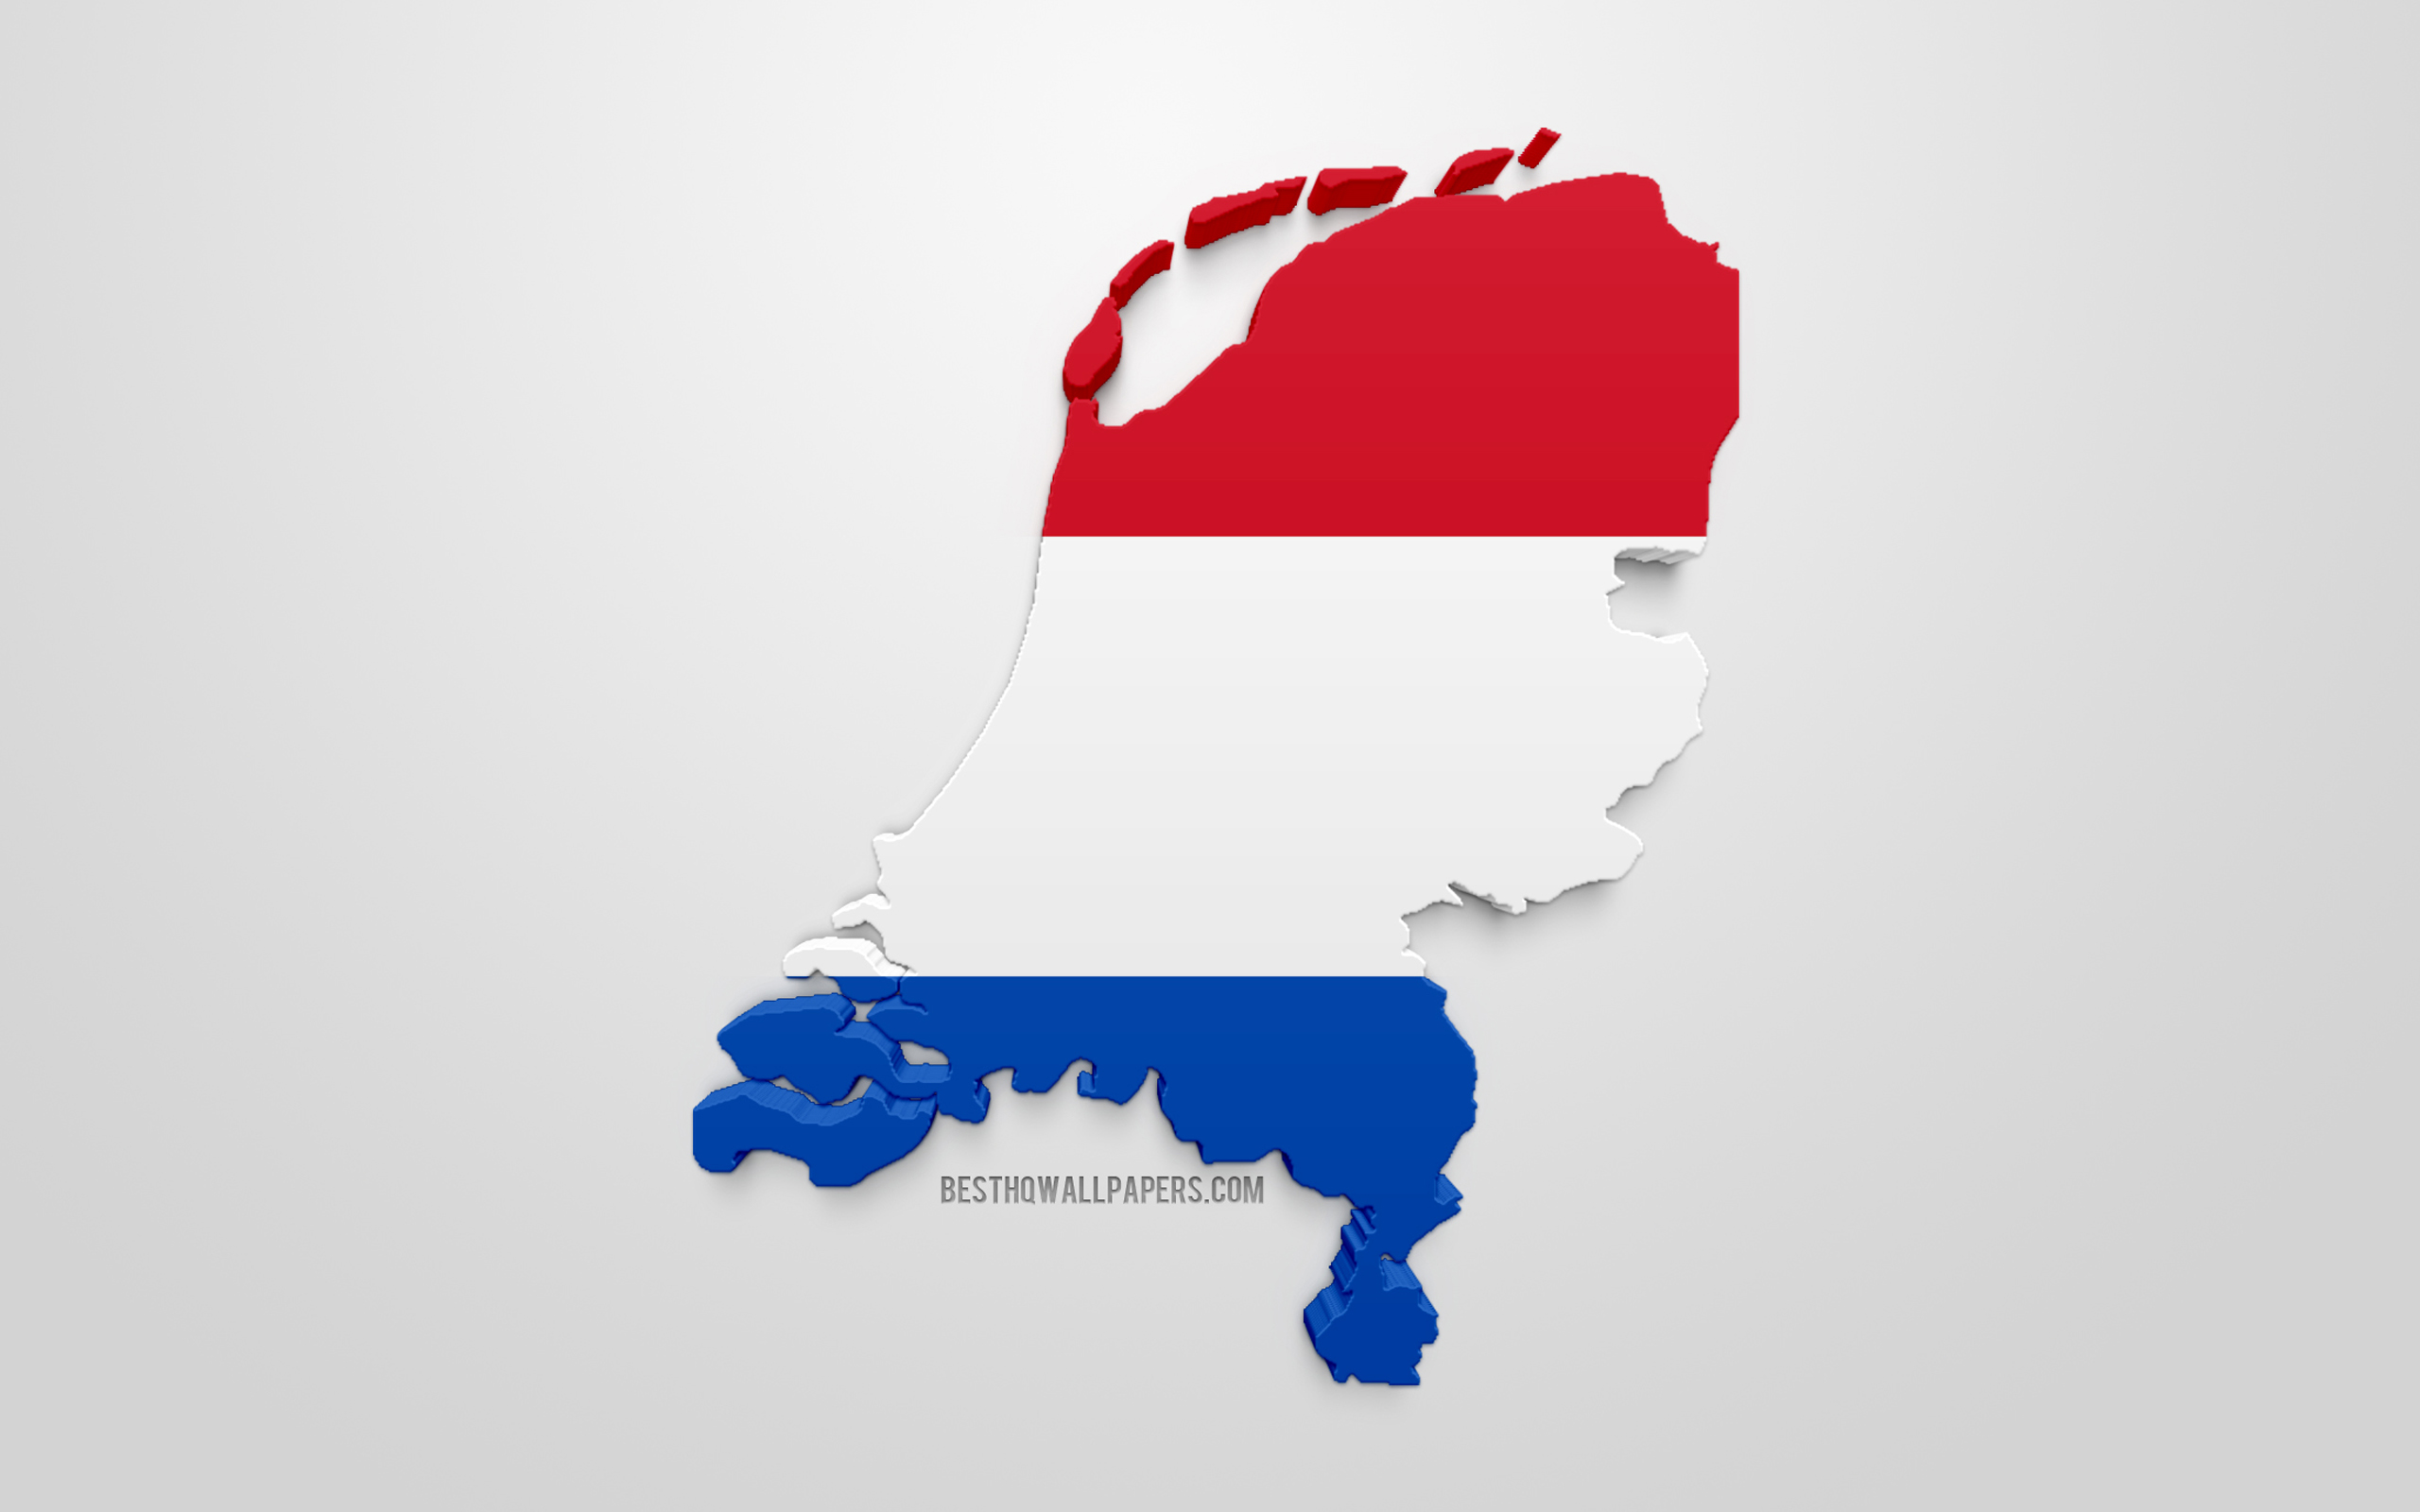 Download wallpaper 3D flag of Netherlands, silhouette map of Netherlands, 3D art, Netherlands flag, Europe, Netherlands, geography, Netherlands 3D silhouette for desktop with resolution 2560x1600. High Quality HD picture wallpaper